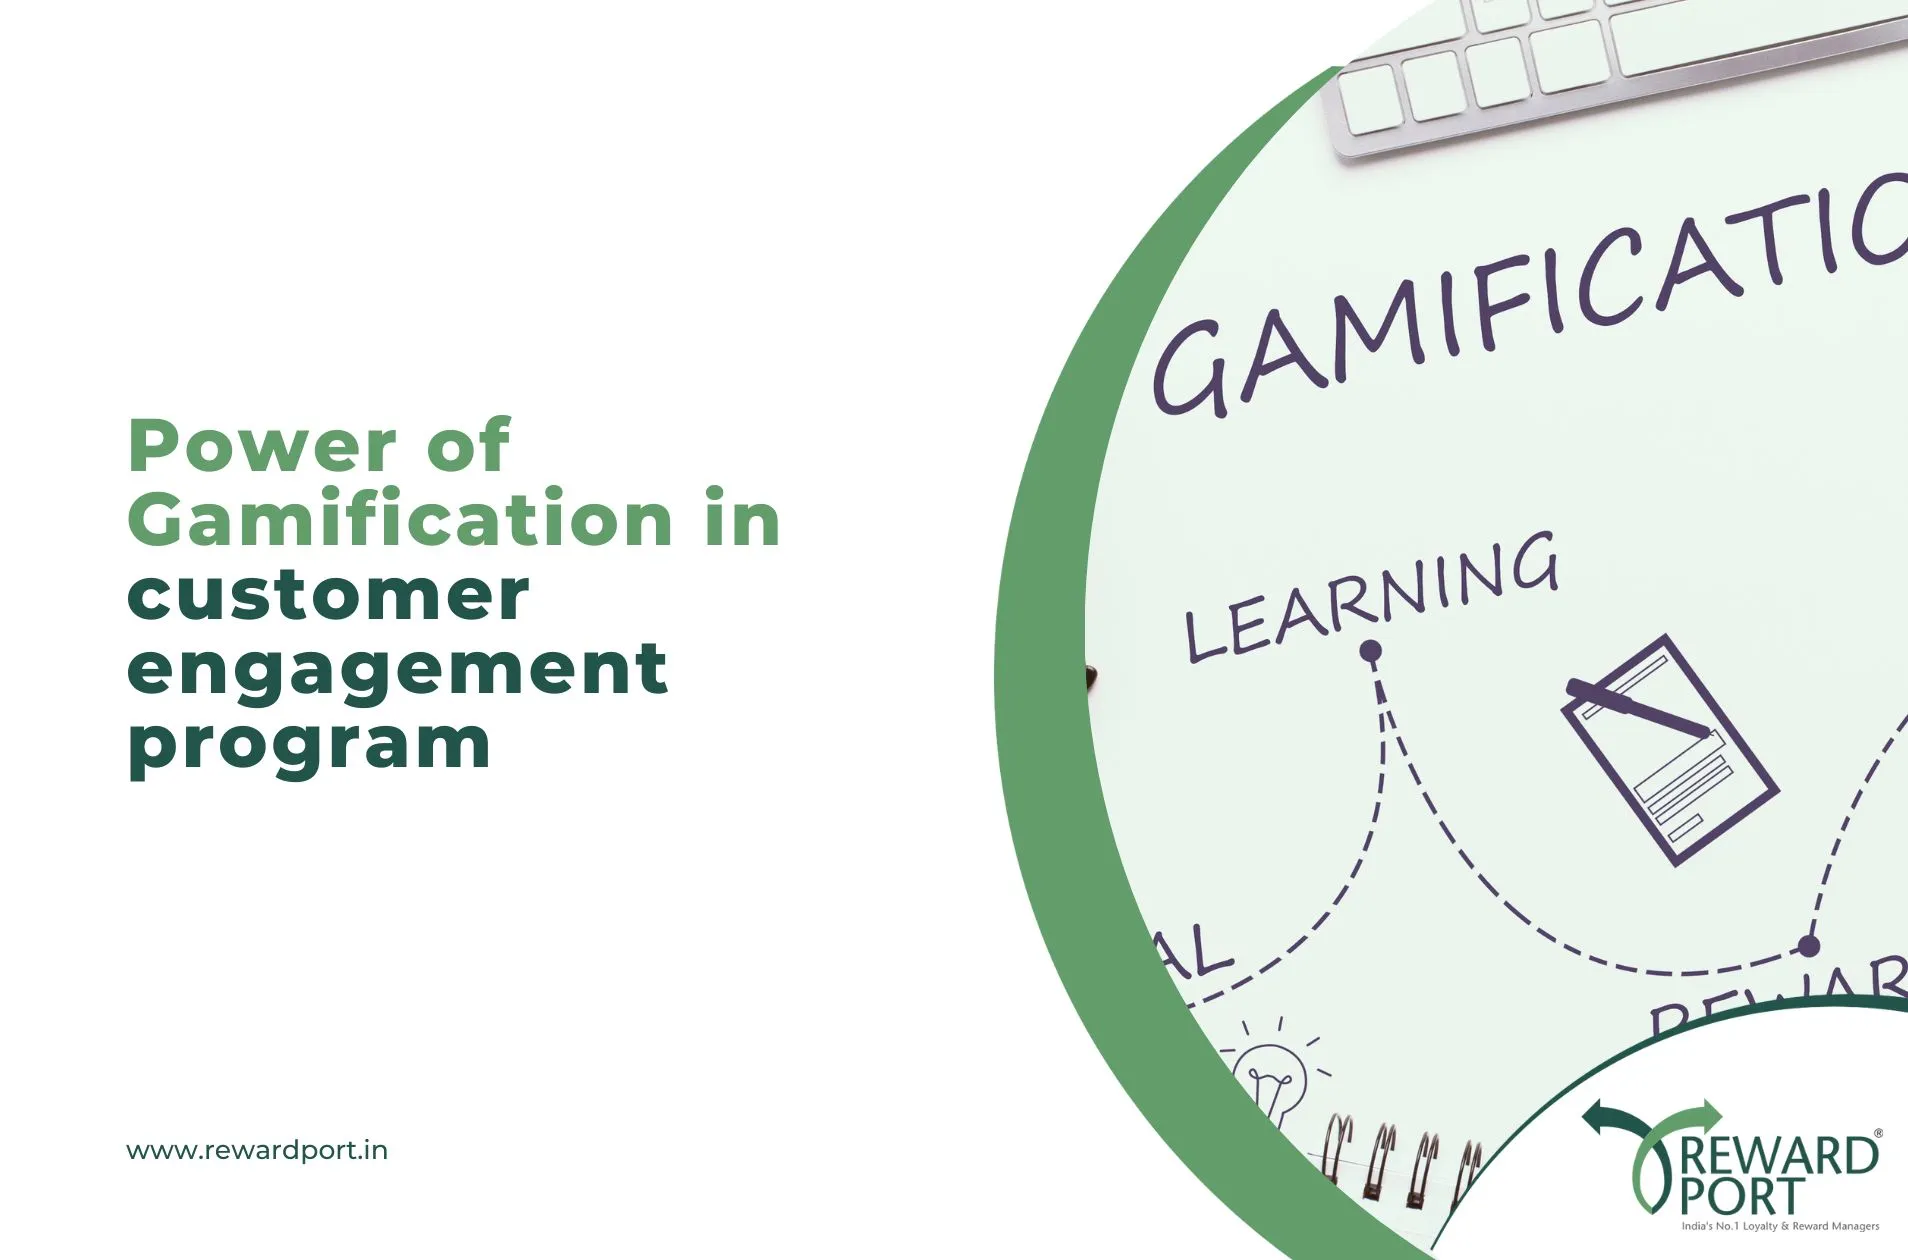 Power of Gamification in customer engagement program